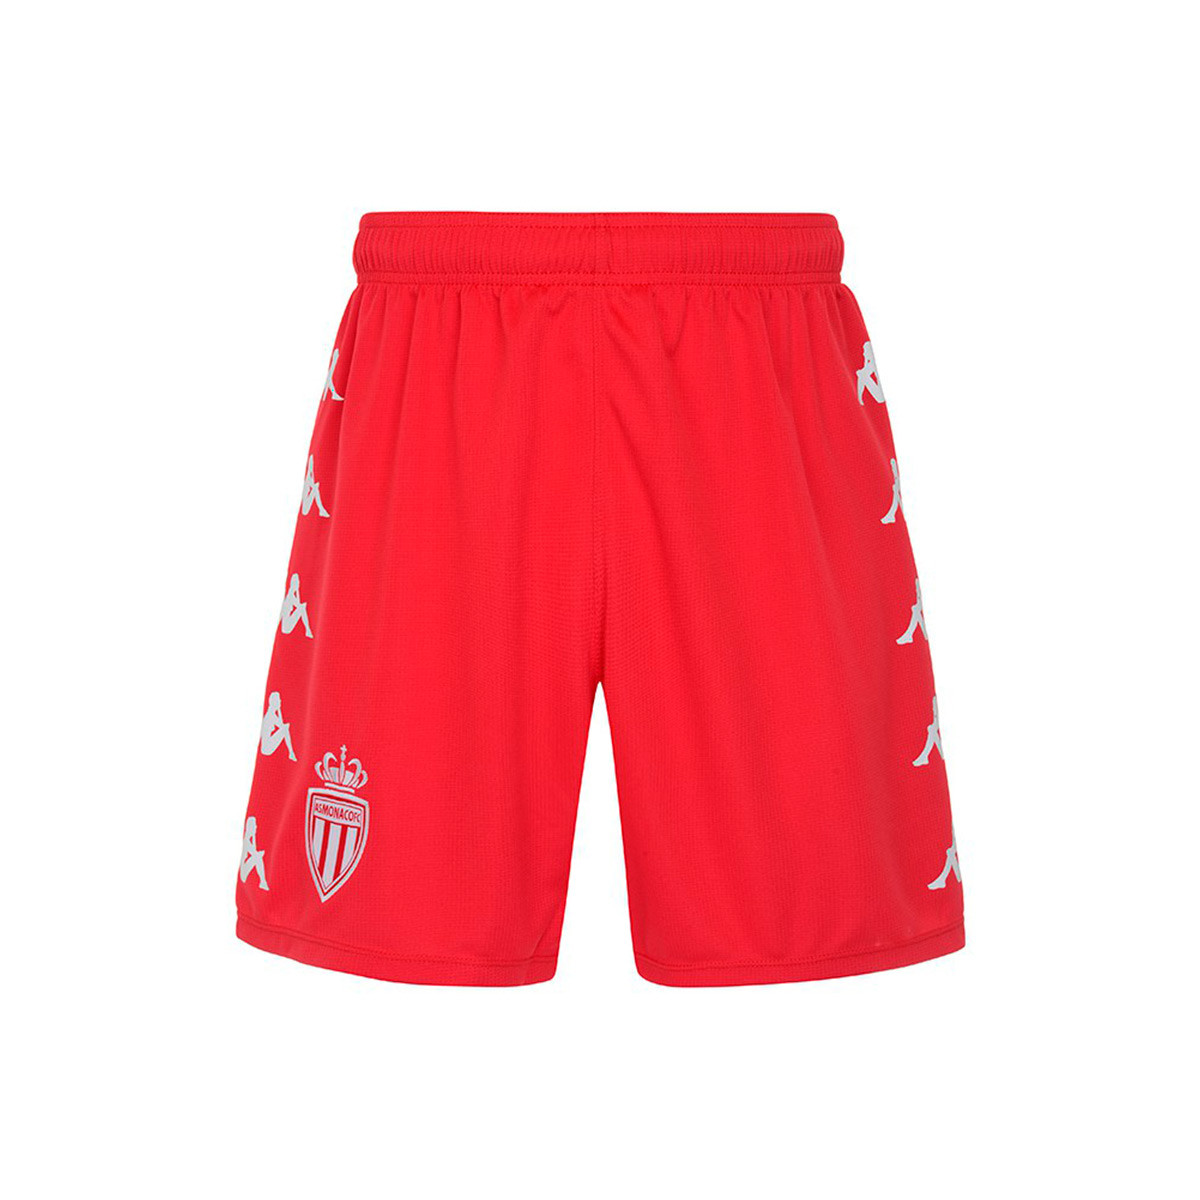 Details about   Shorts Football Kappa Monaco Shorts Jr White 2019.20 Home Red 81585 New 